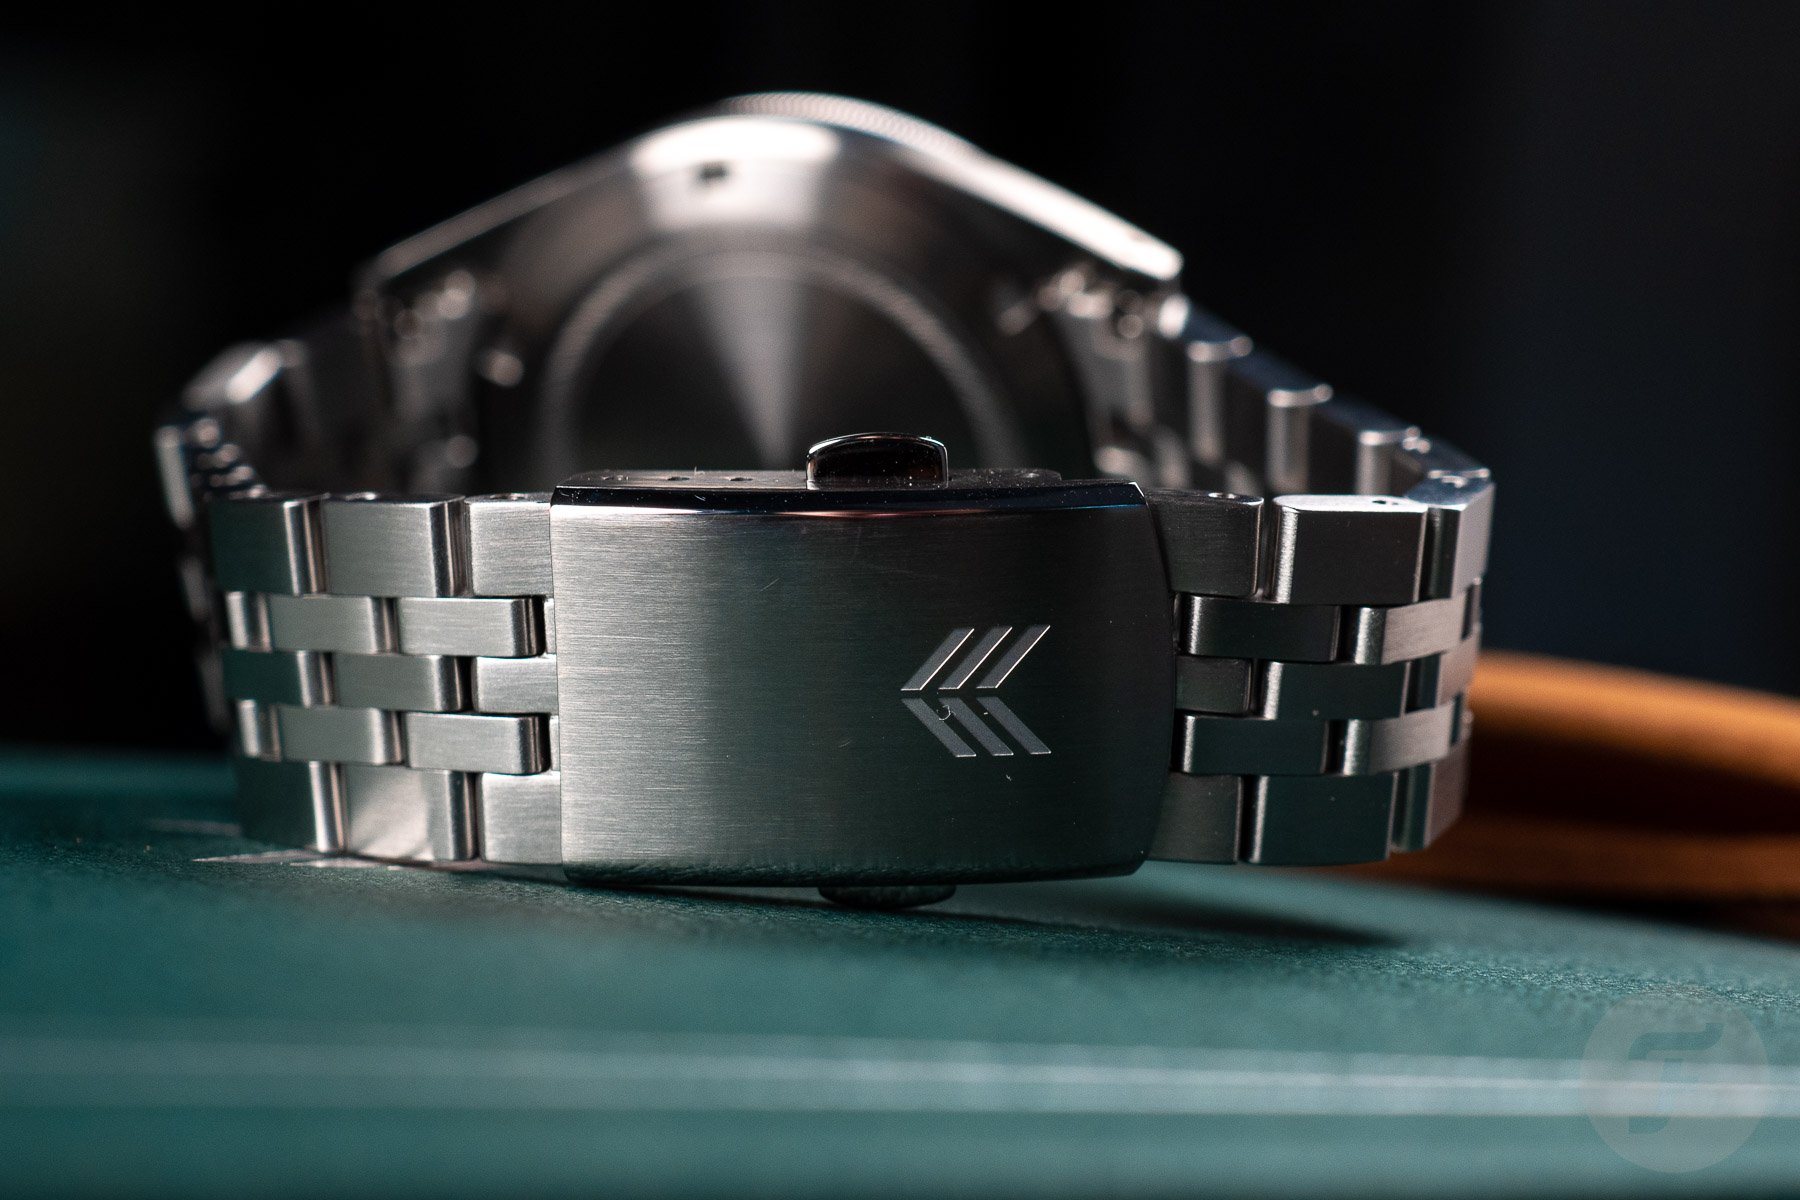 Hands-On With Three Lorier Watches: Hyperion, Falcon, Neptune